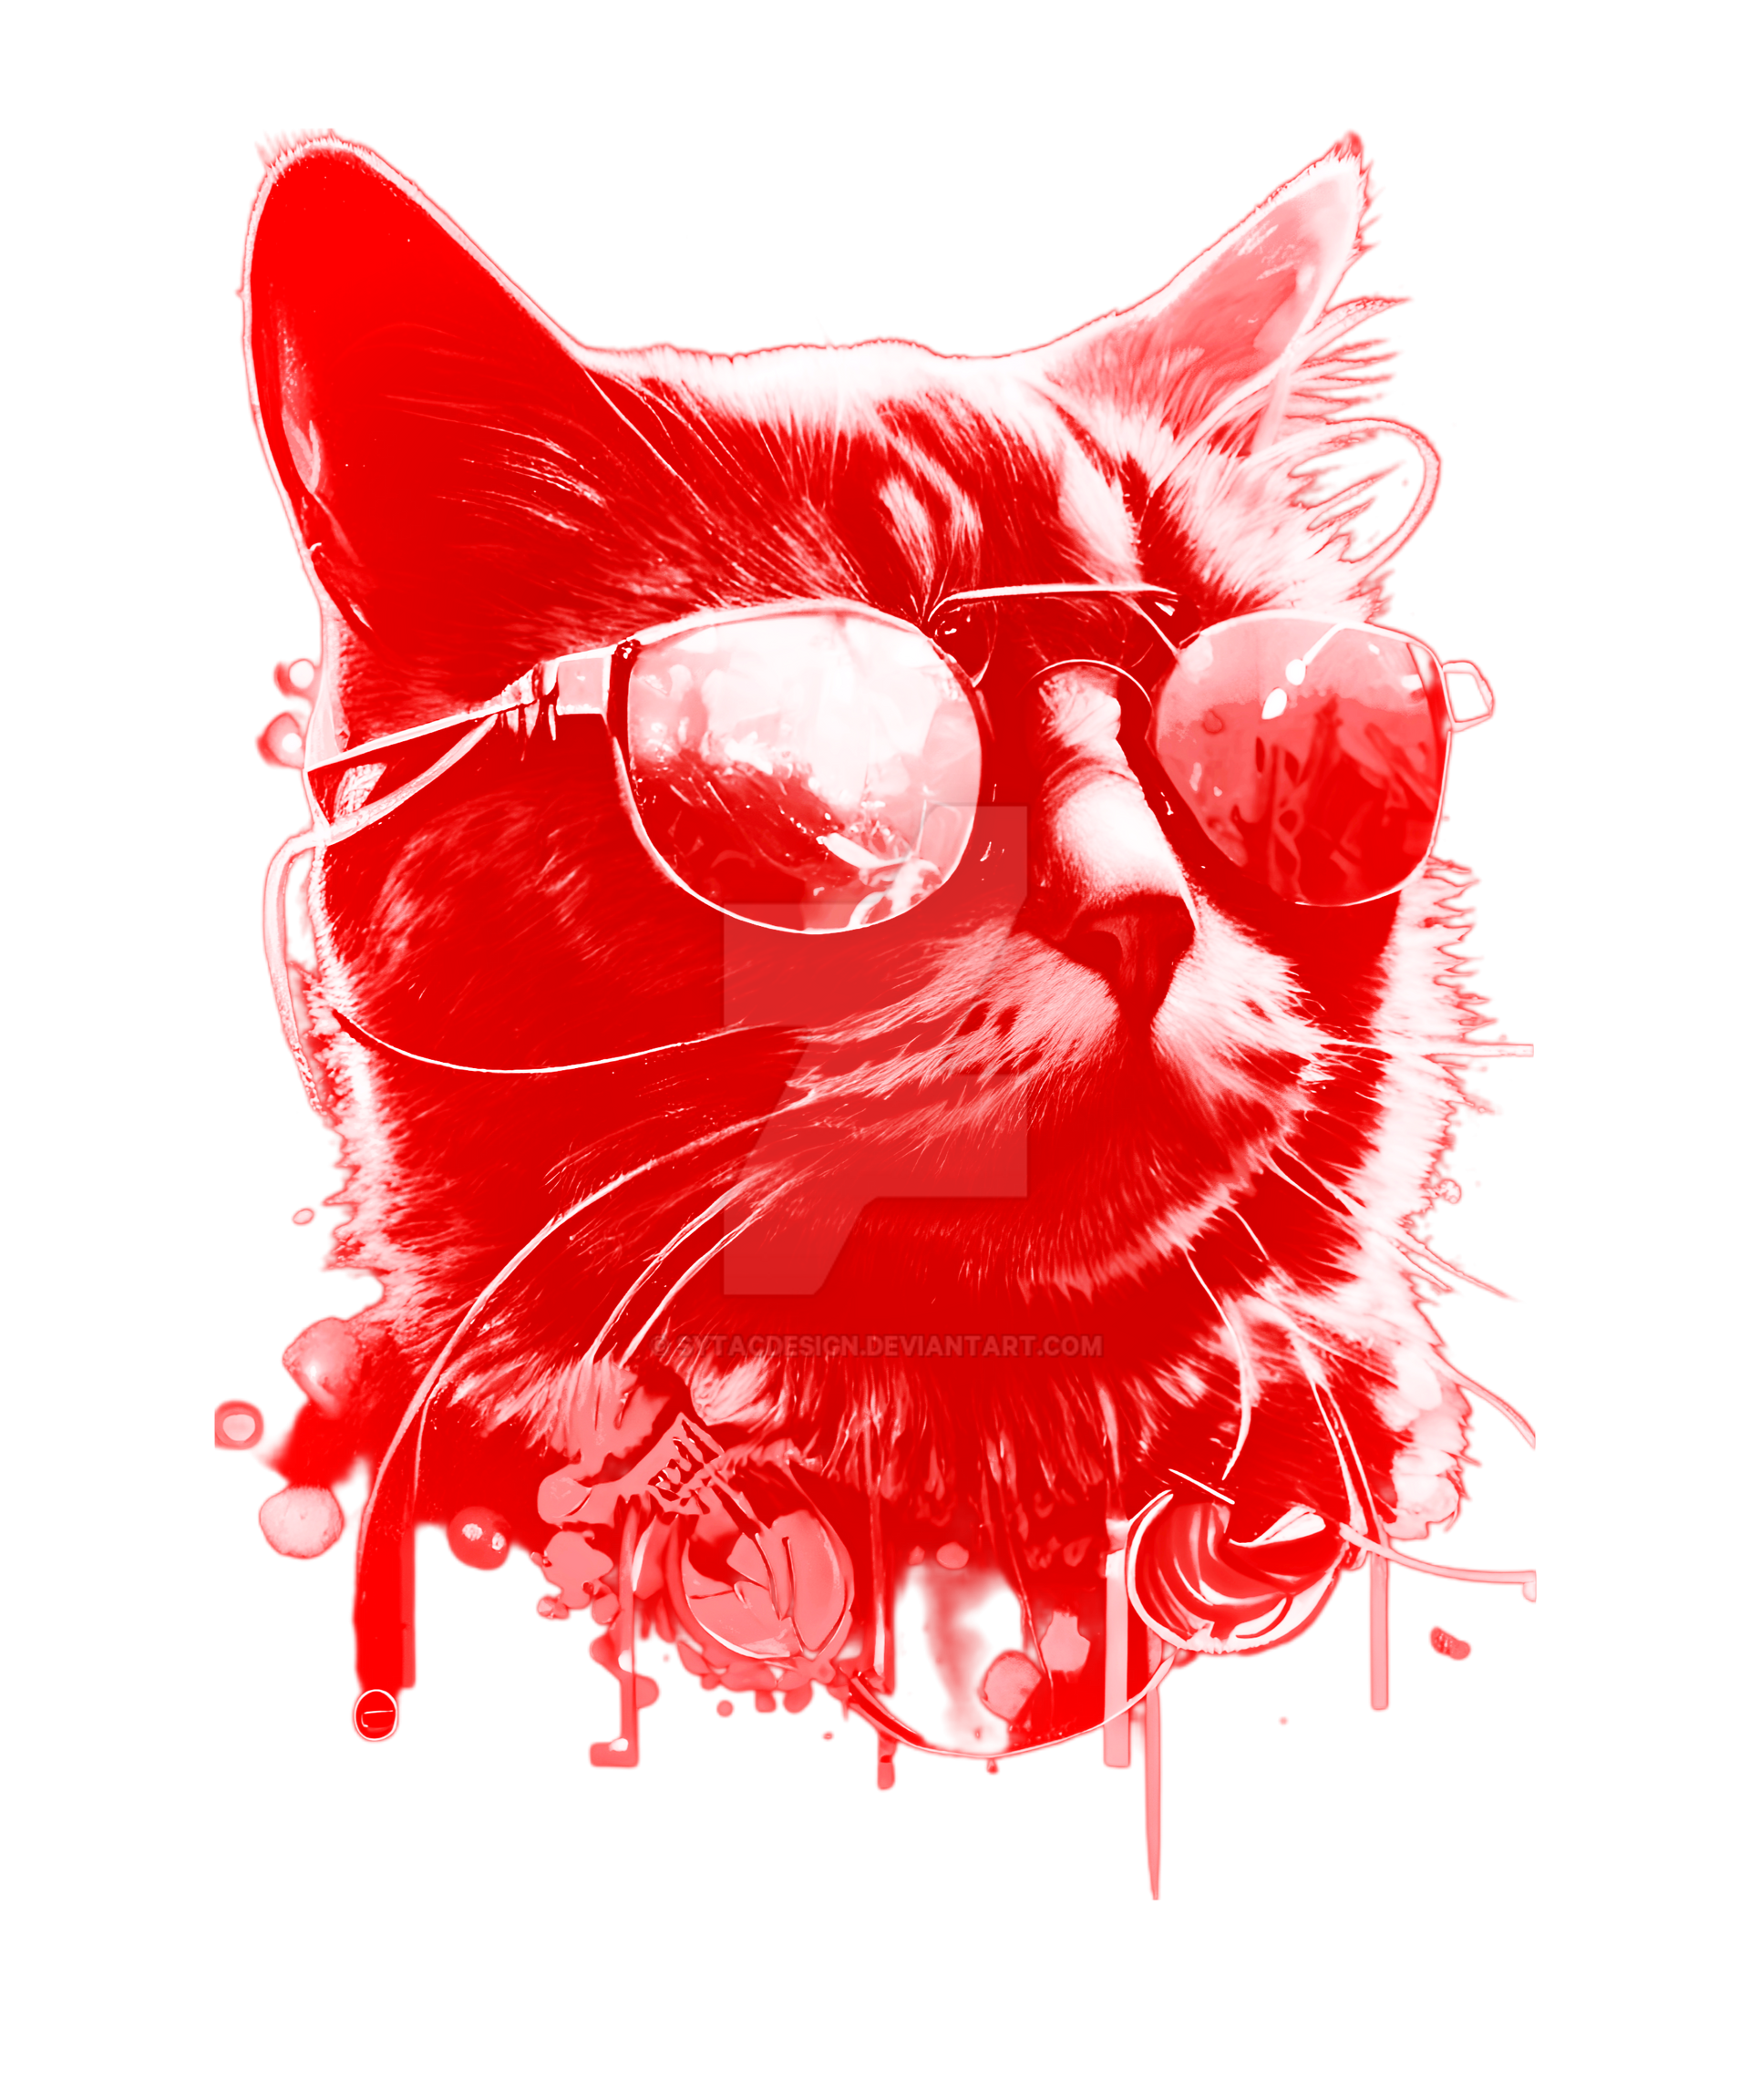 Kitty Cool Cat Sunglasses cat Hip by sytacdesign on DeviantArt